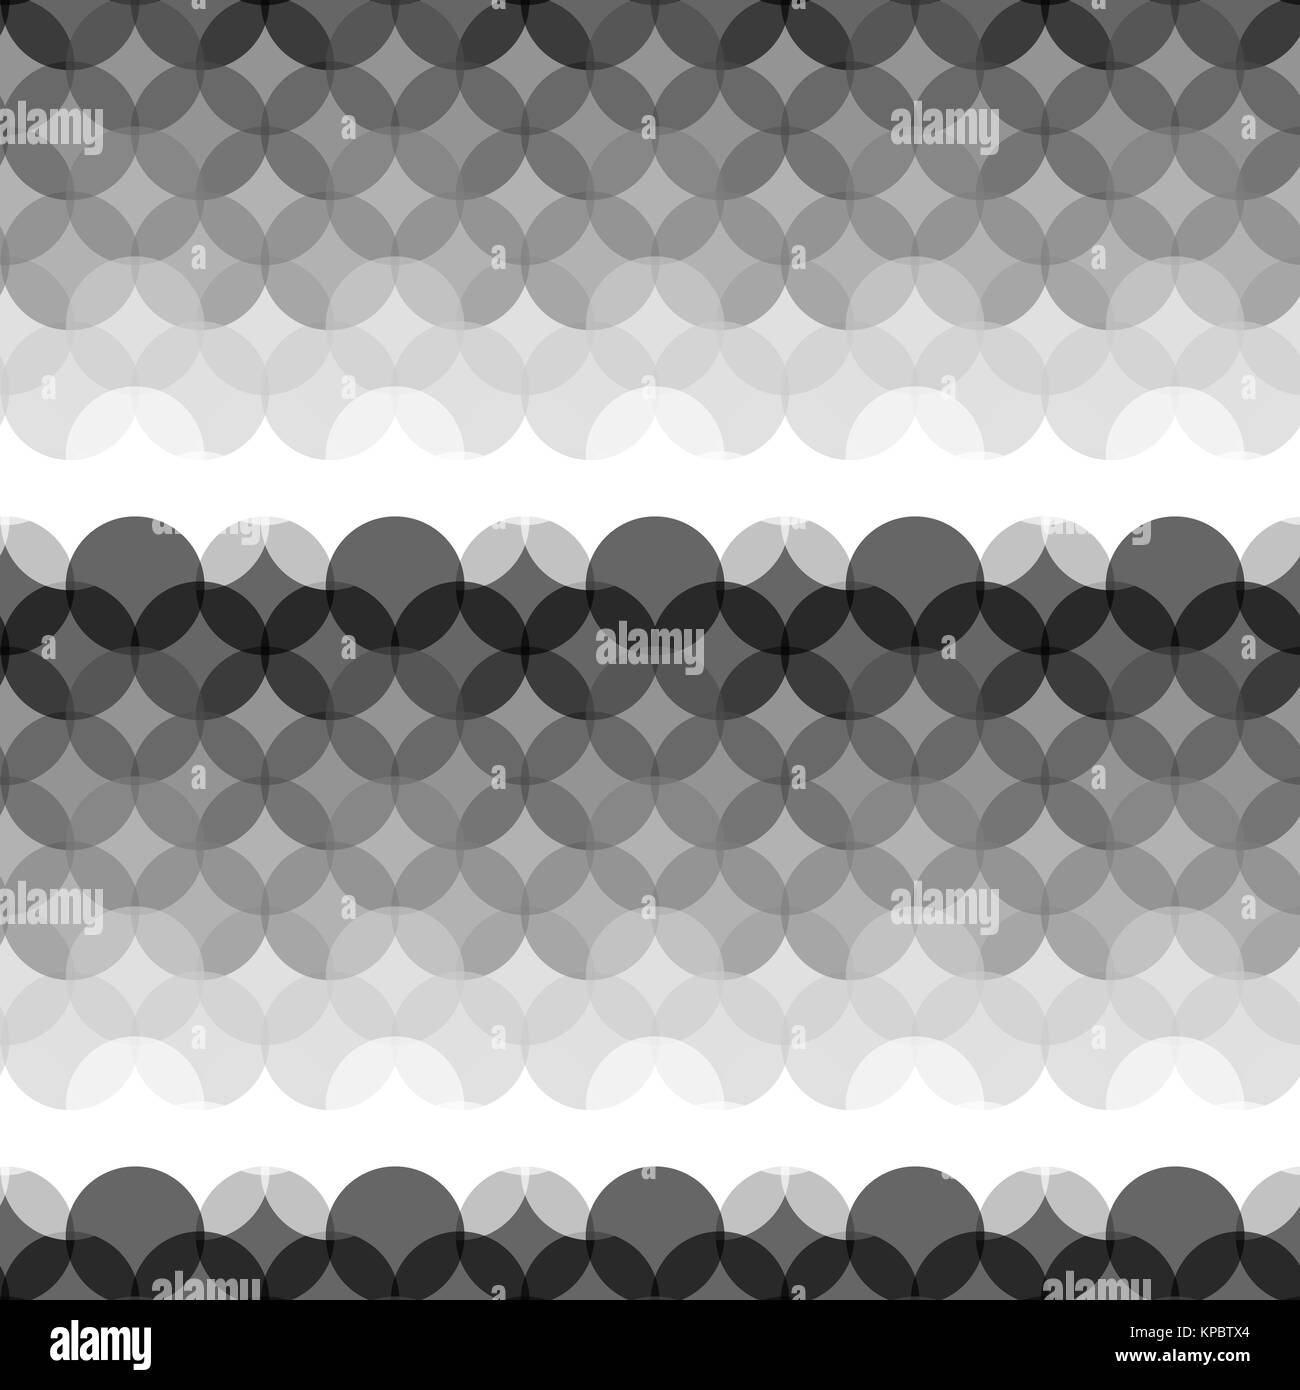 Seamless Gray Scale Pattern Created from Circle Intersections Stock Photo